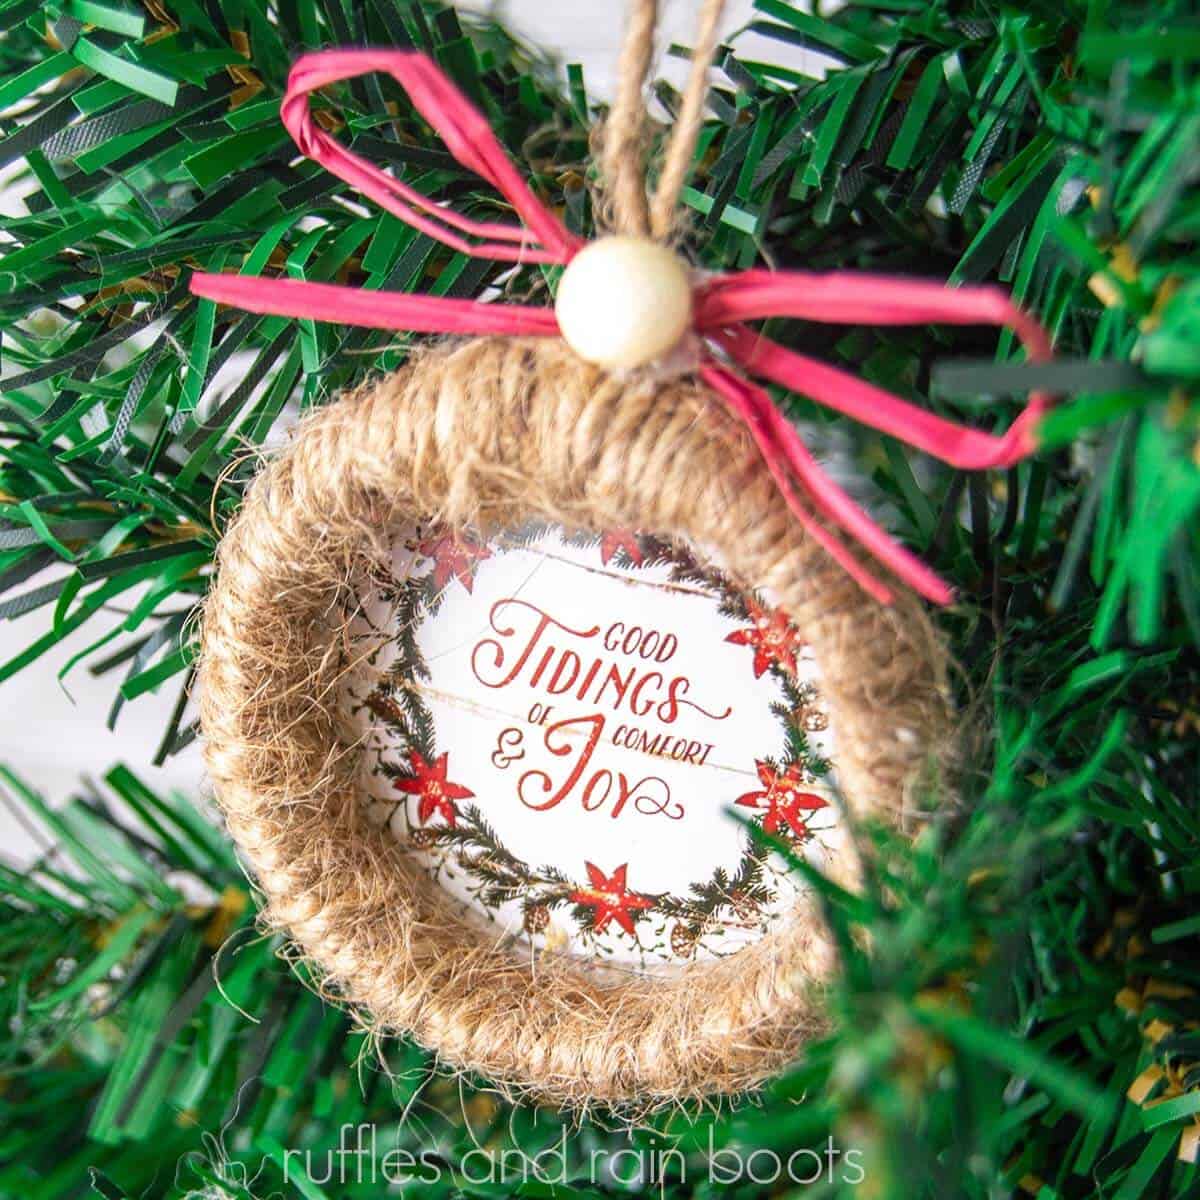 square close up image of a Dollar Tree twine wreath ornament with red bow and good tidings of comfort and joy calendar page hanging on a faux Christmas tree